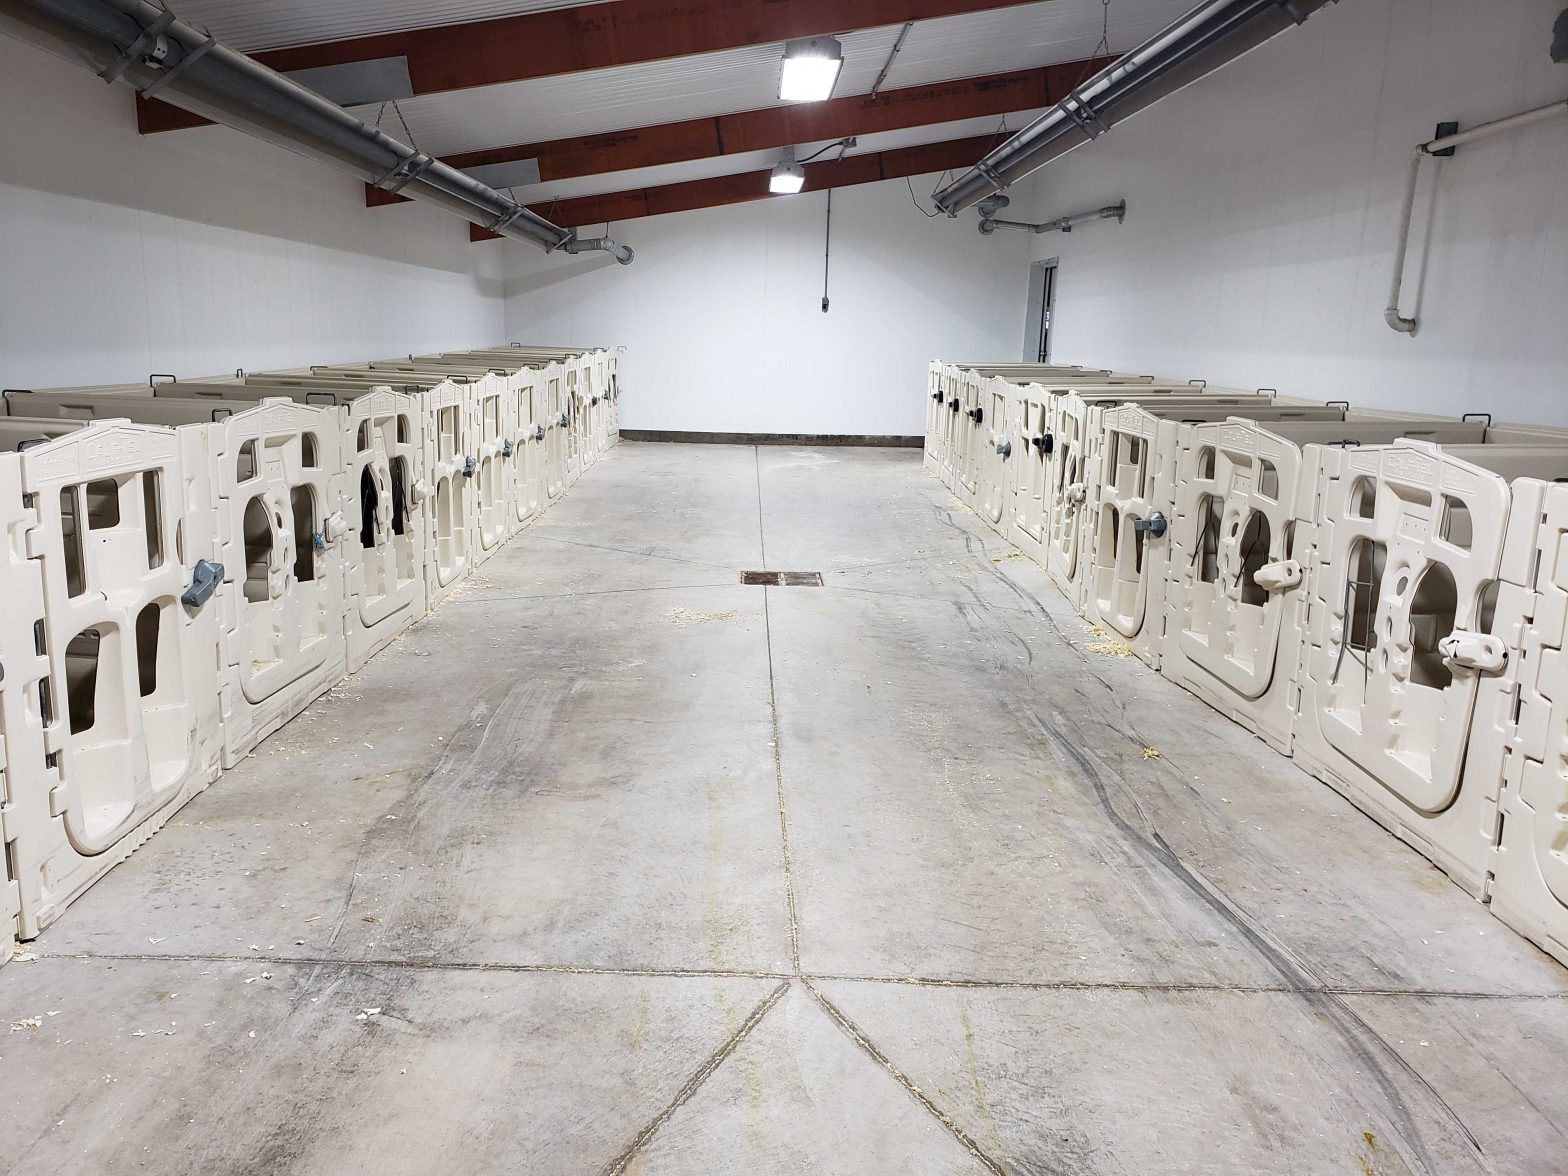 At Shiloh Dairy LLC in Brillion, Wisconsin, newborn calves are placed in this warming room for the first 12 to 36 hours of life.  Infrared tube heaters keep this room warm for newborn calves.  The room’s walls are also insulated.